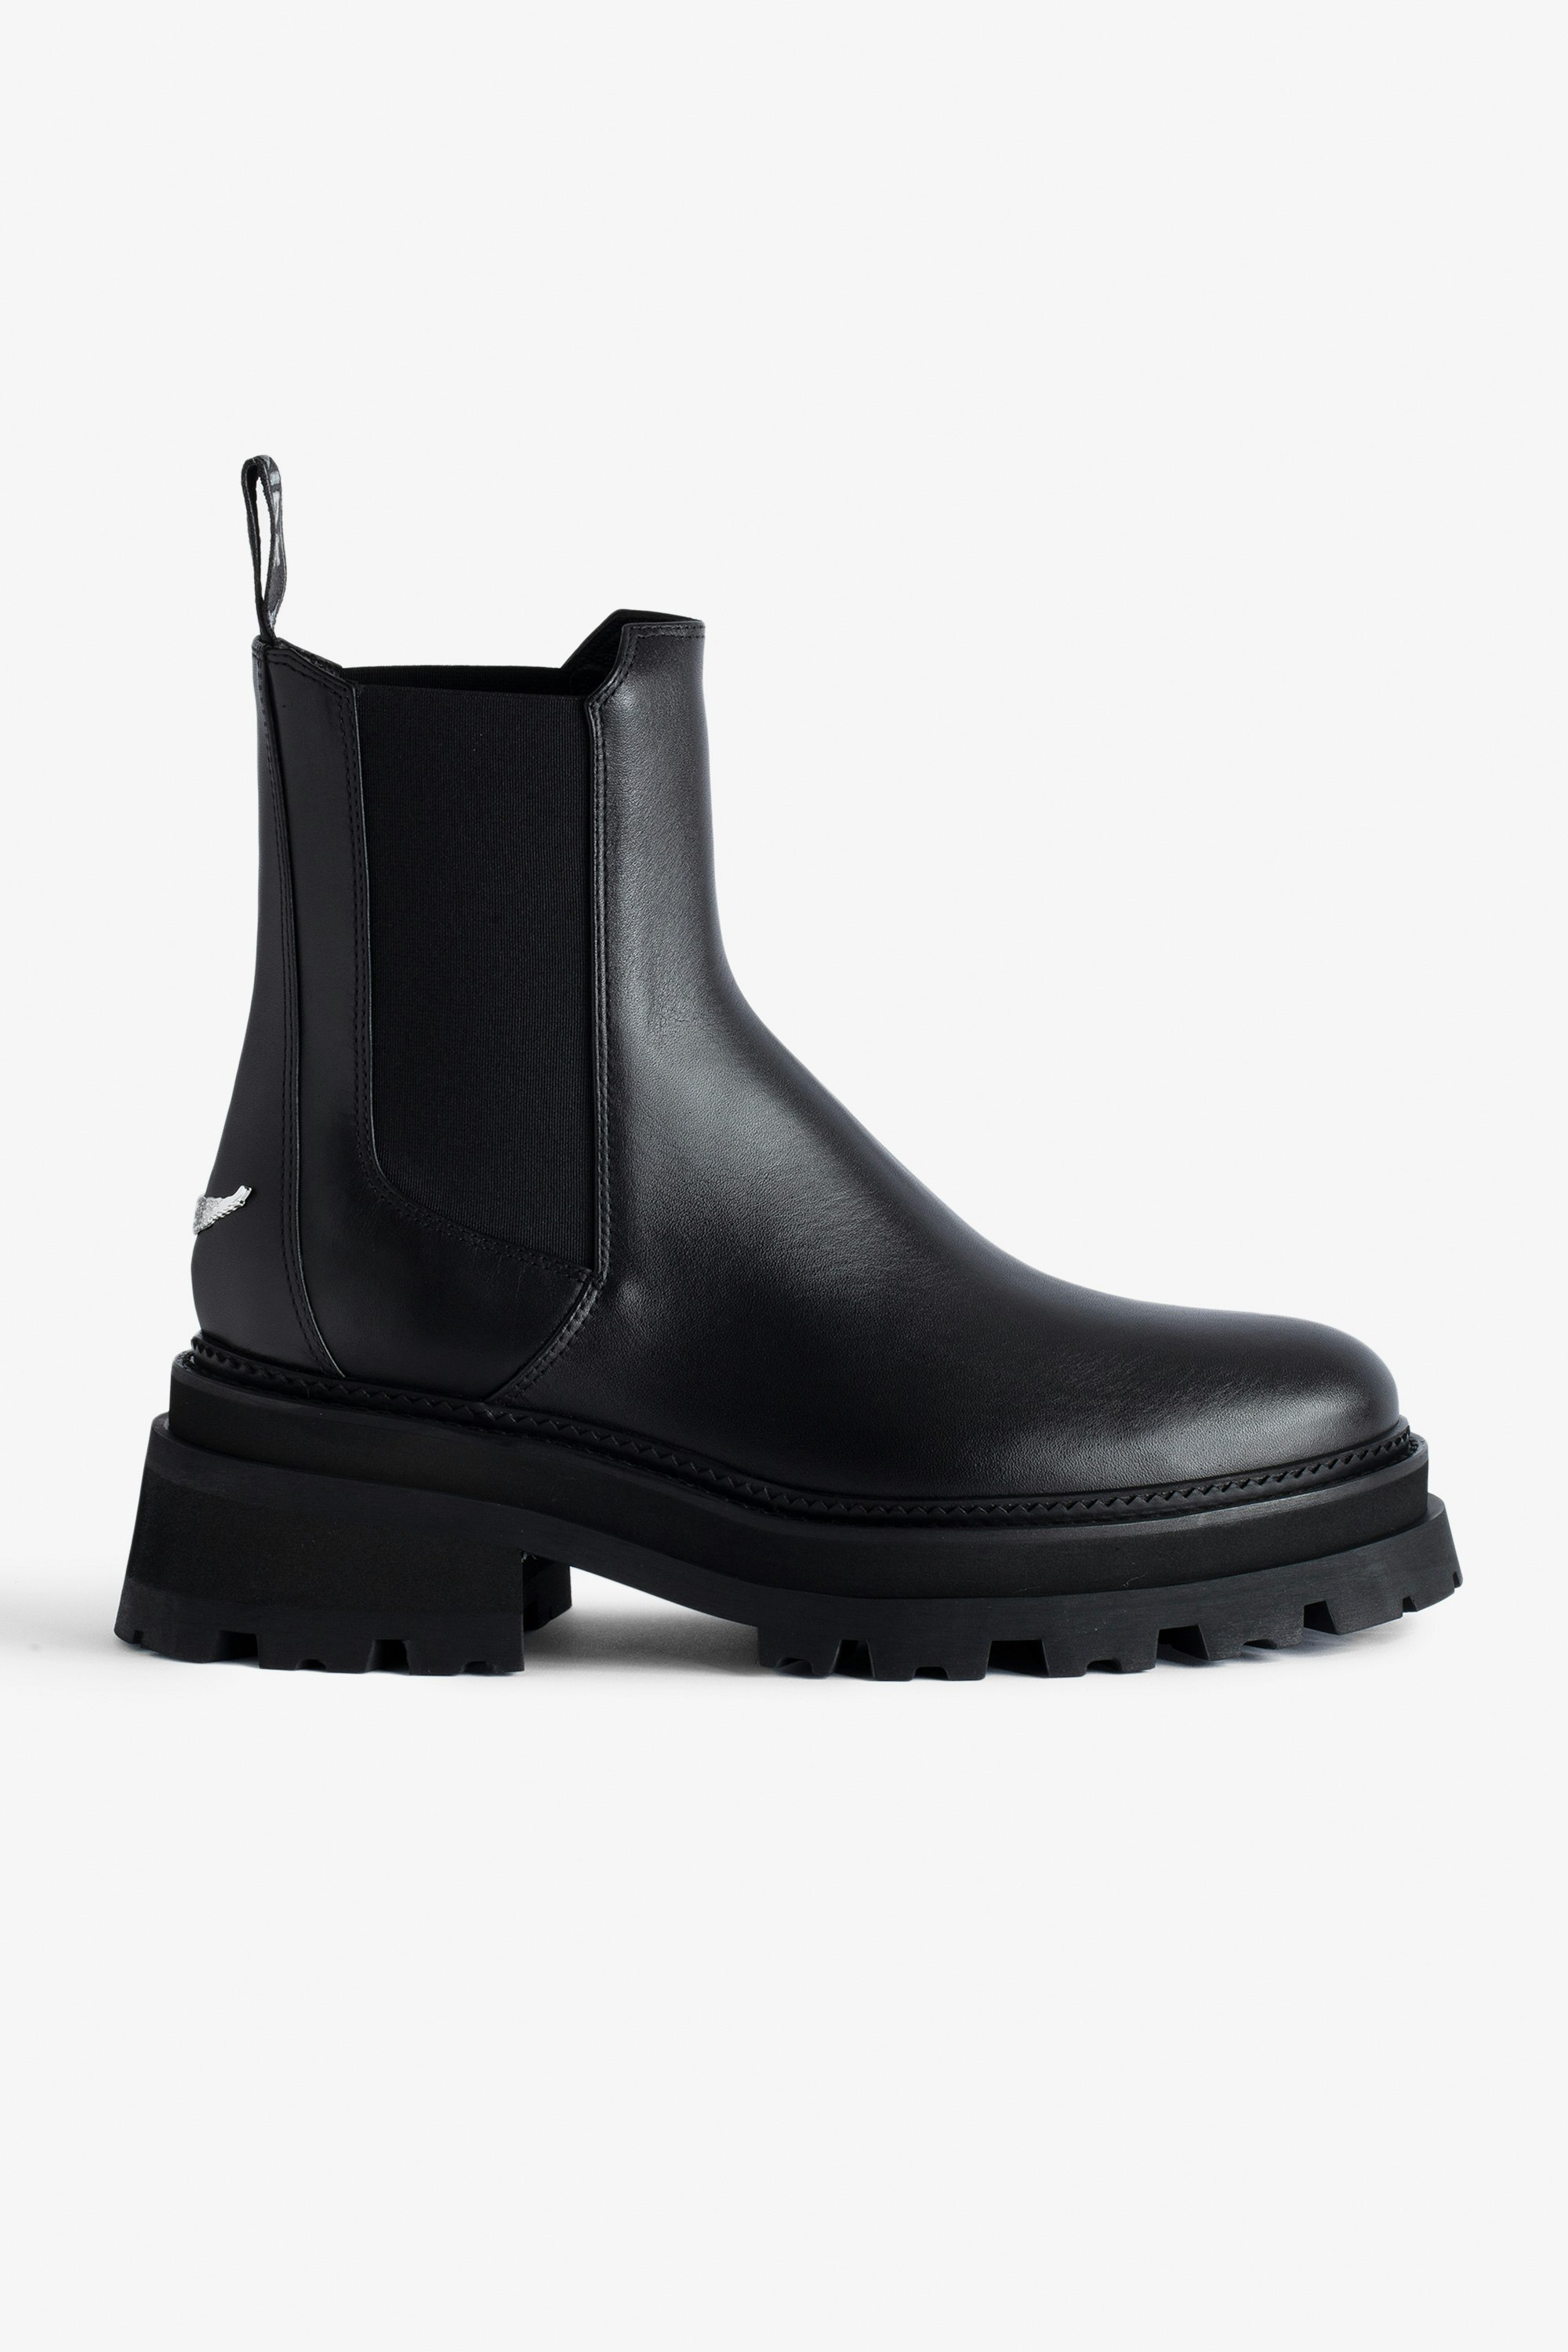 Ride Chelsea Boots Women’s black semi-patent smooth leather Chelsea boots with wings charm.